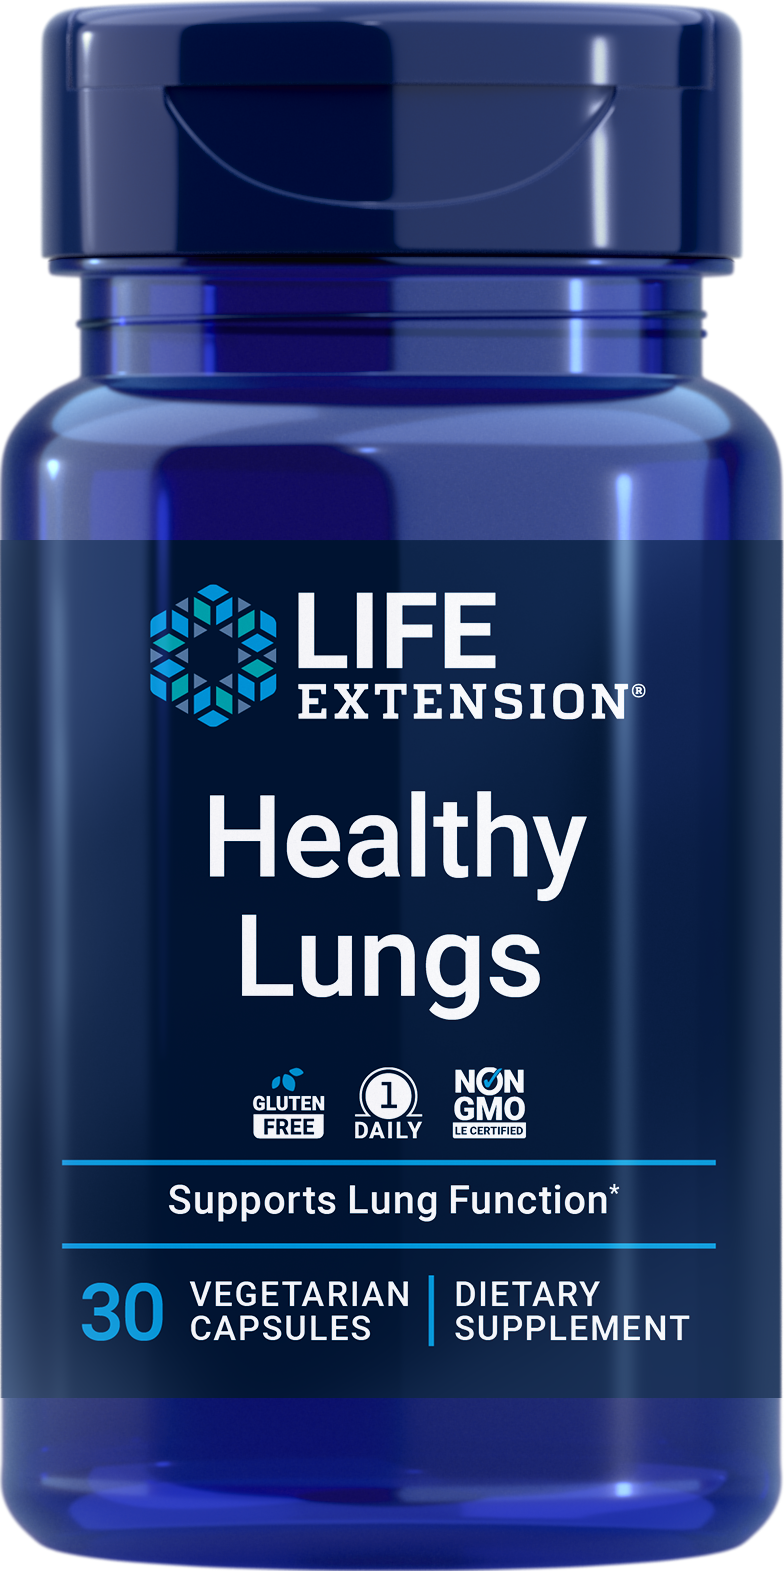 Worried About Air Quality? Life Extension Offers